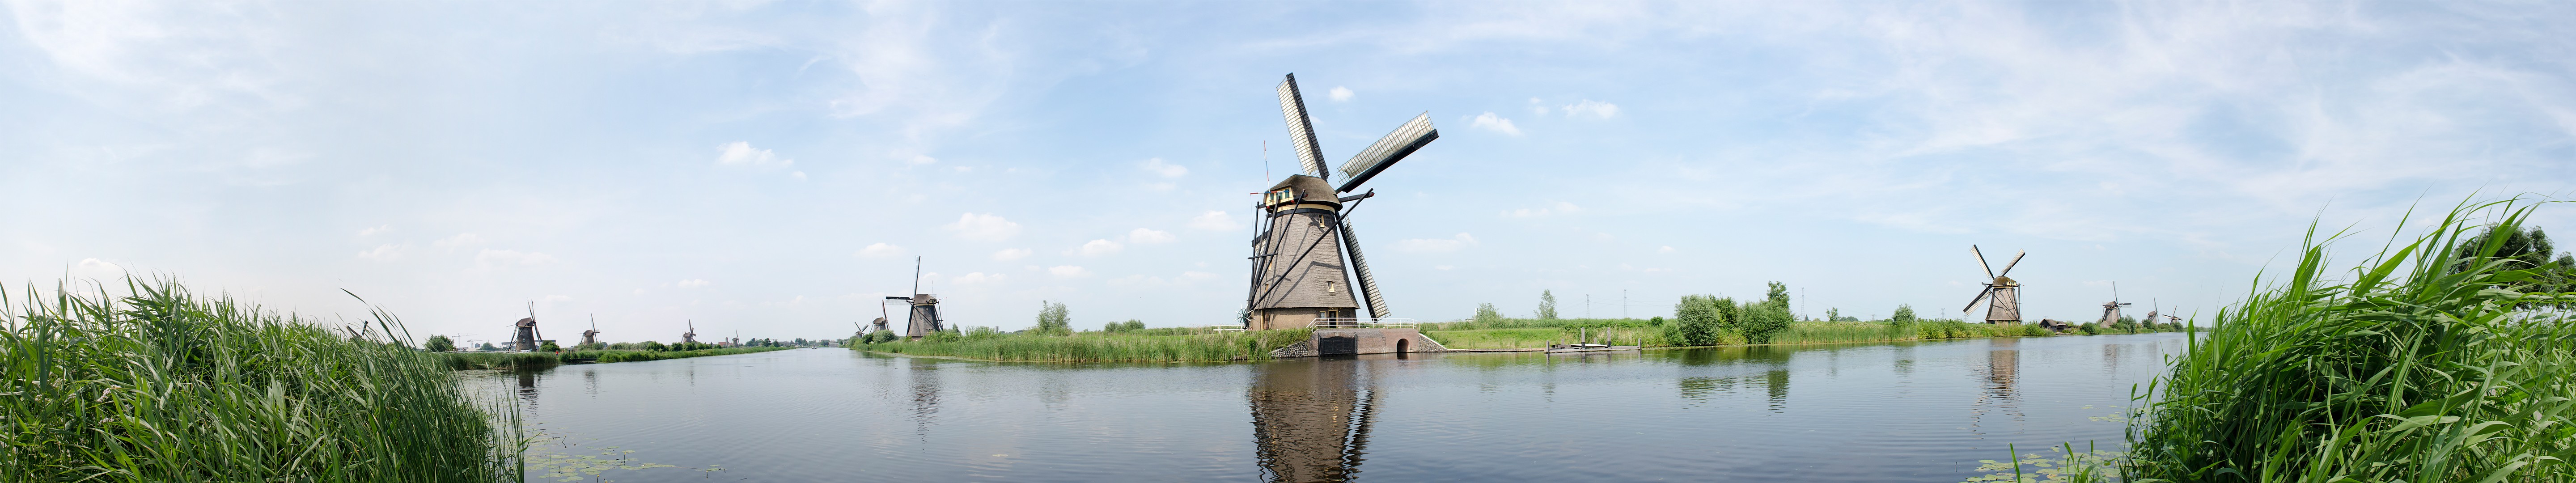 General 5760x1080 water outdoors windmill